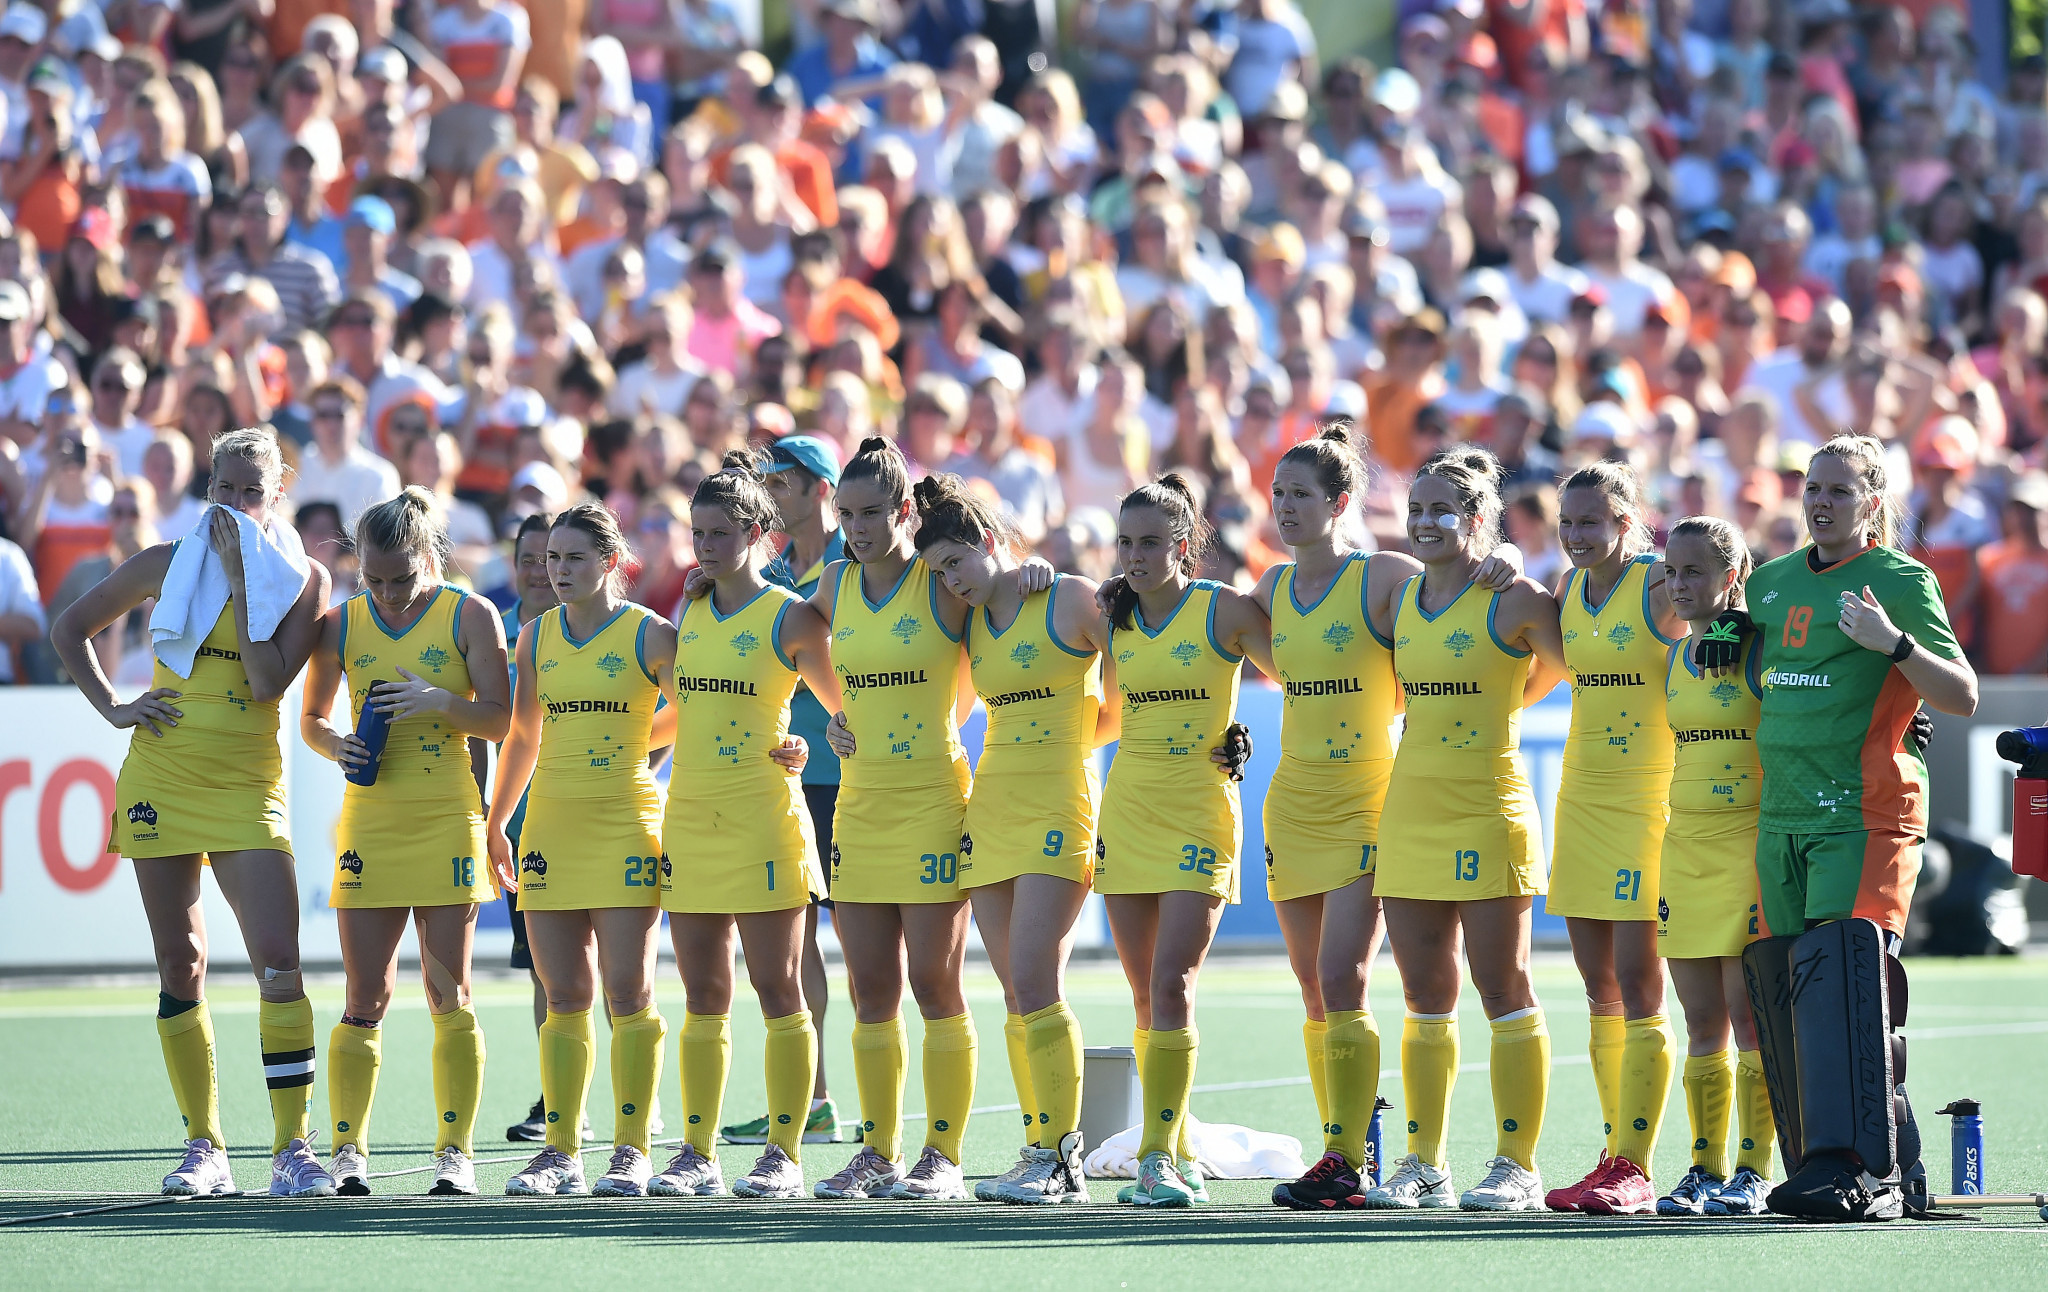 Members of the Australian women's hockey team are reportedly considering strike action over the culture within the sport ©Getty Images 